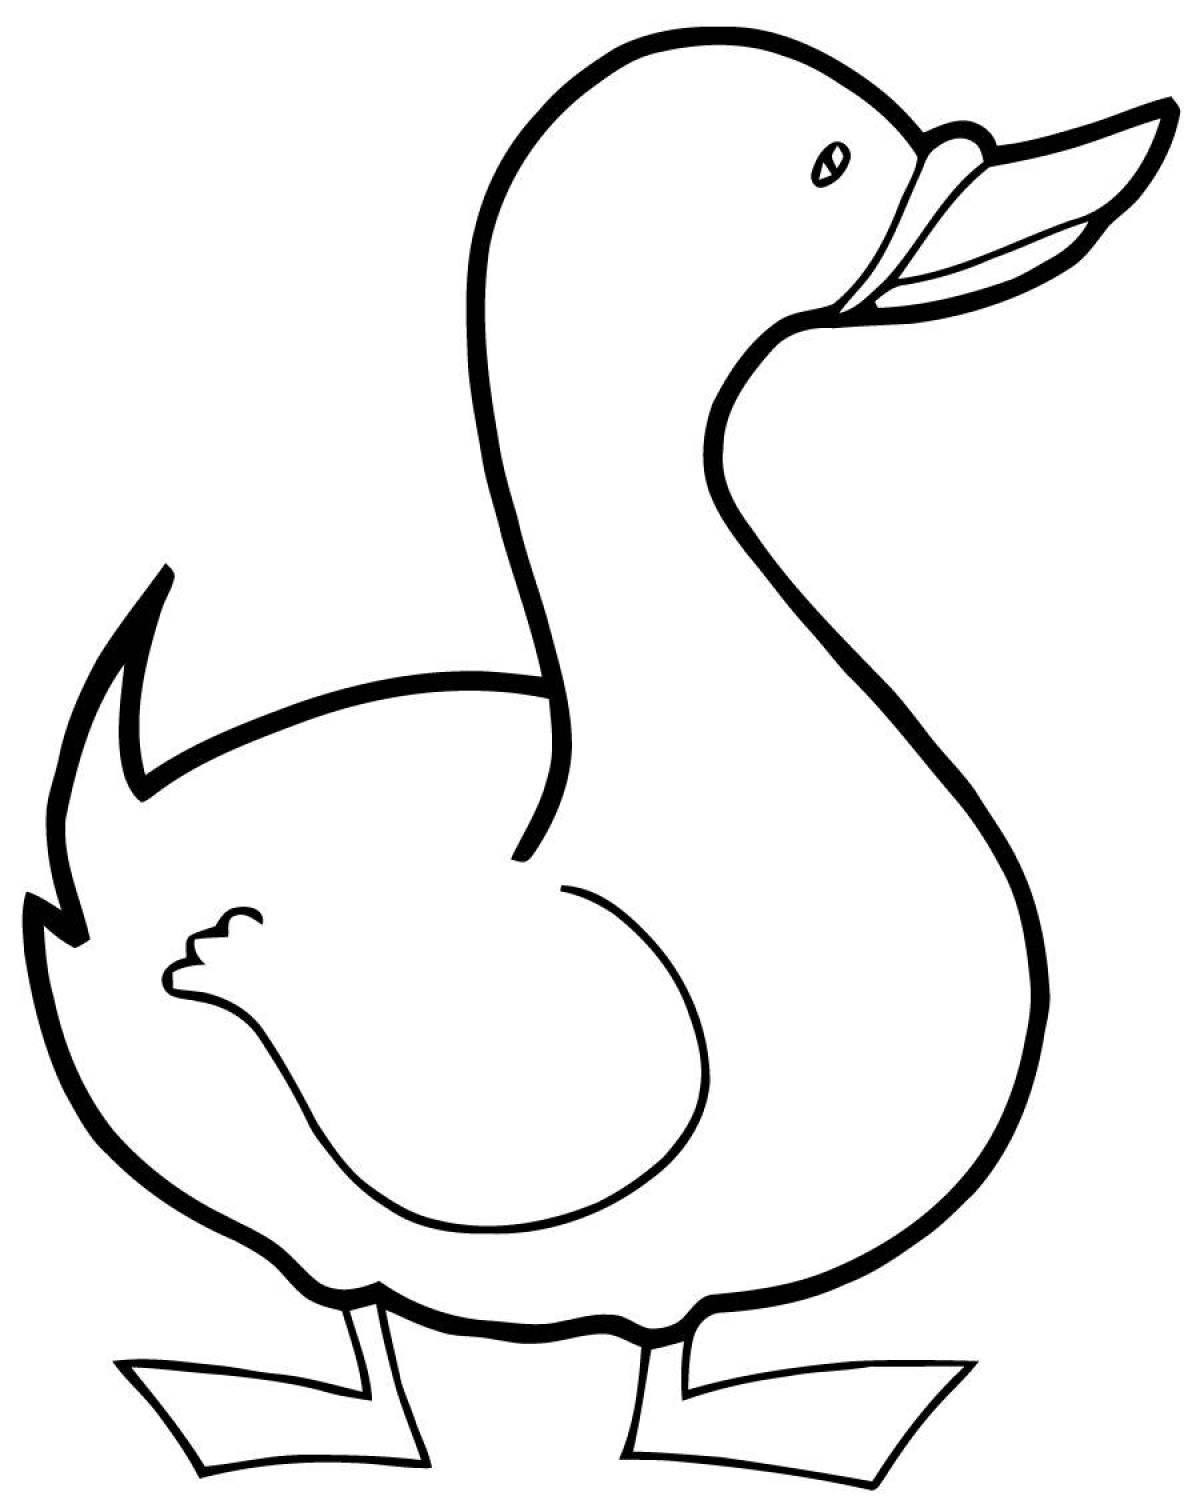 Lalafan live duck coloring book for kids